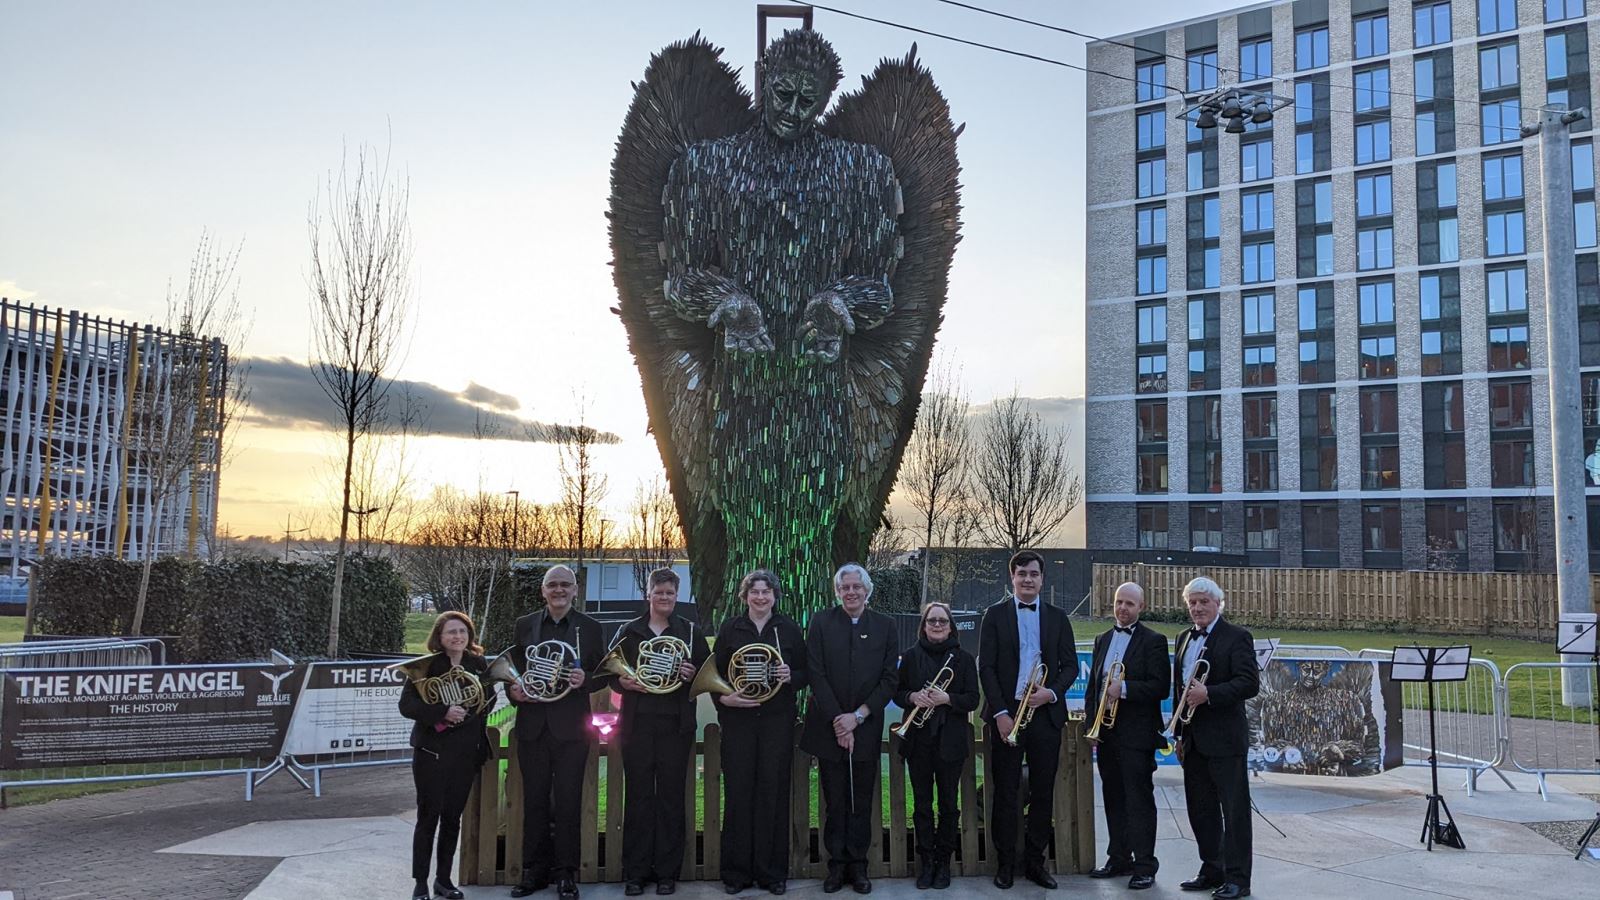 British Police Symphony Orchestra at the Knife Angel in Stoke-on-Trent